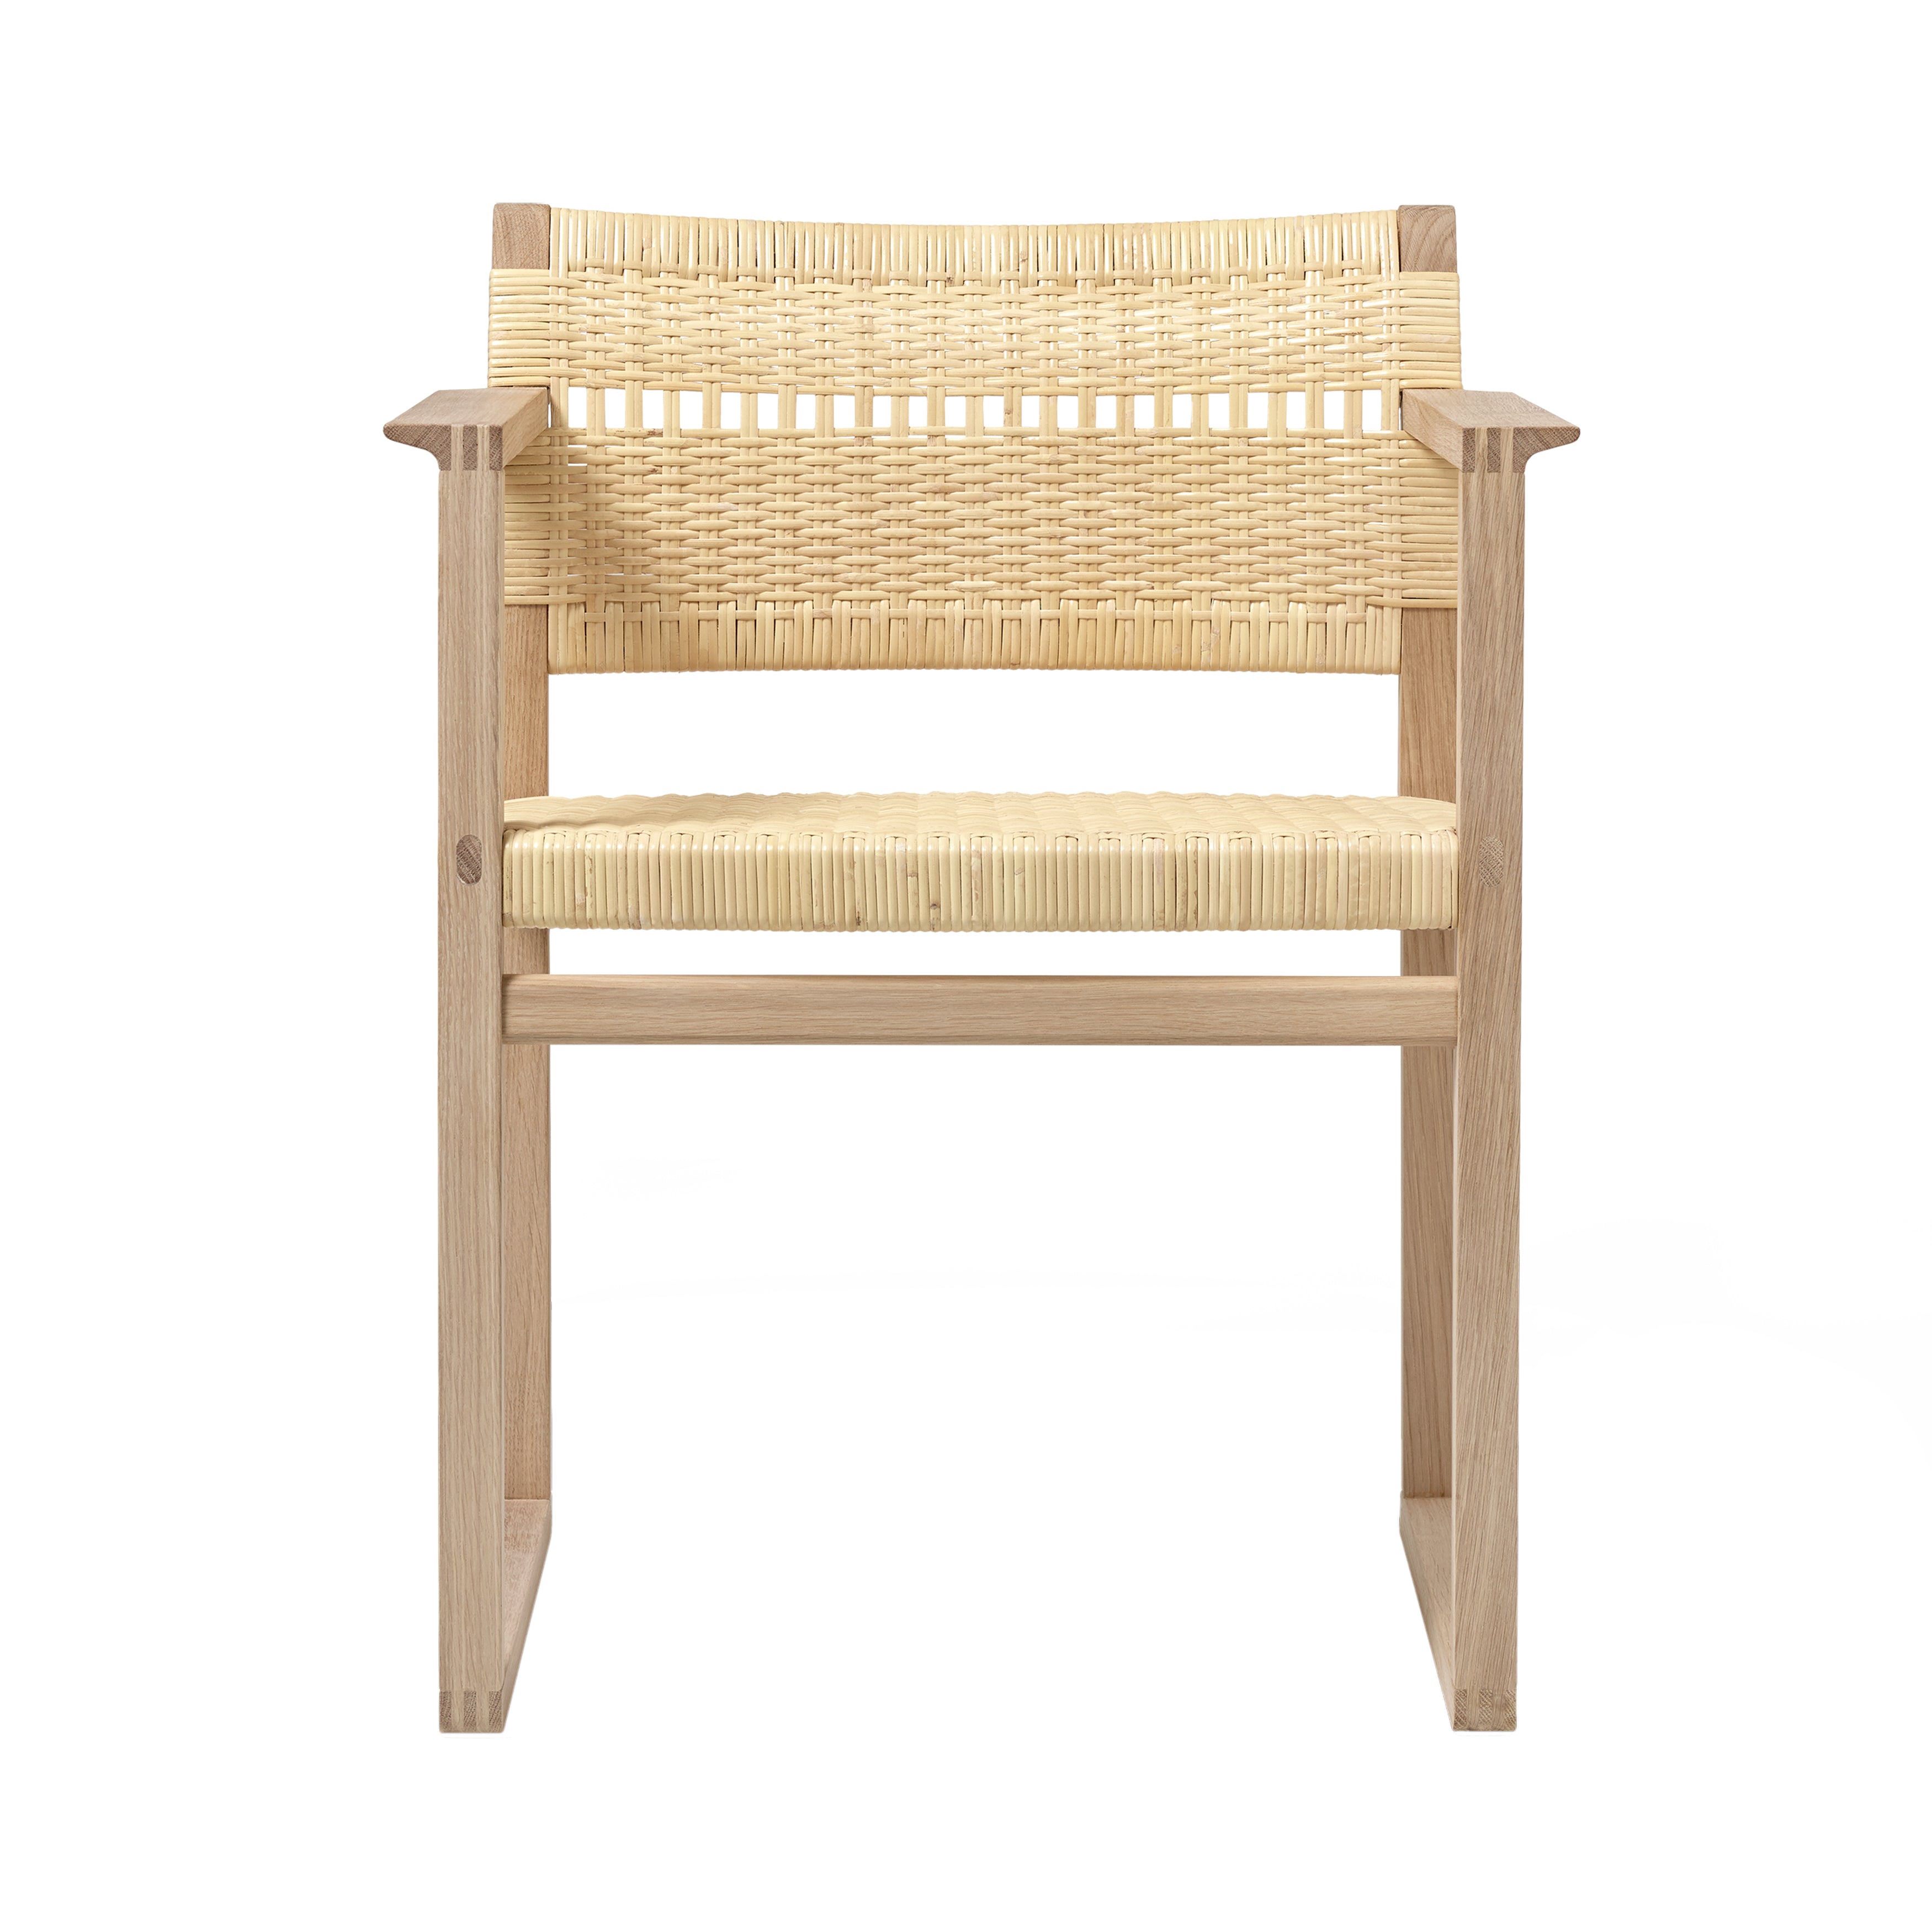 BM62 + BM61 Chair: Natural Cane Wicker + With Arm + Lacquered Oak